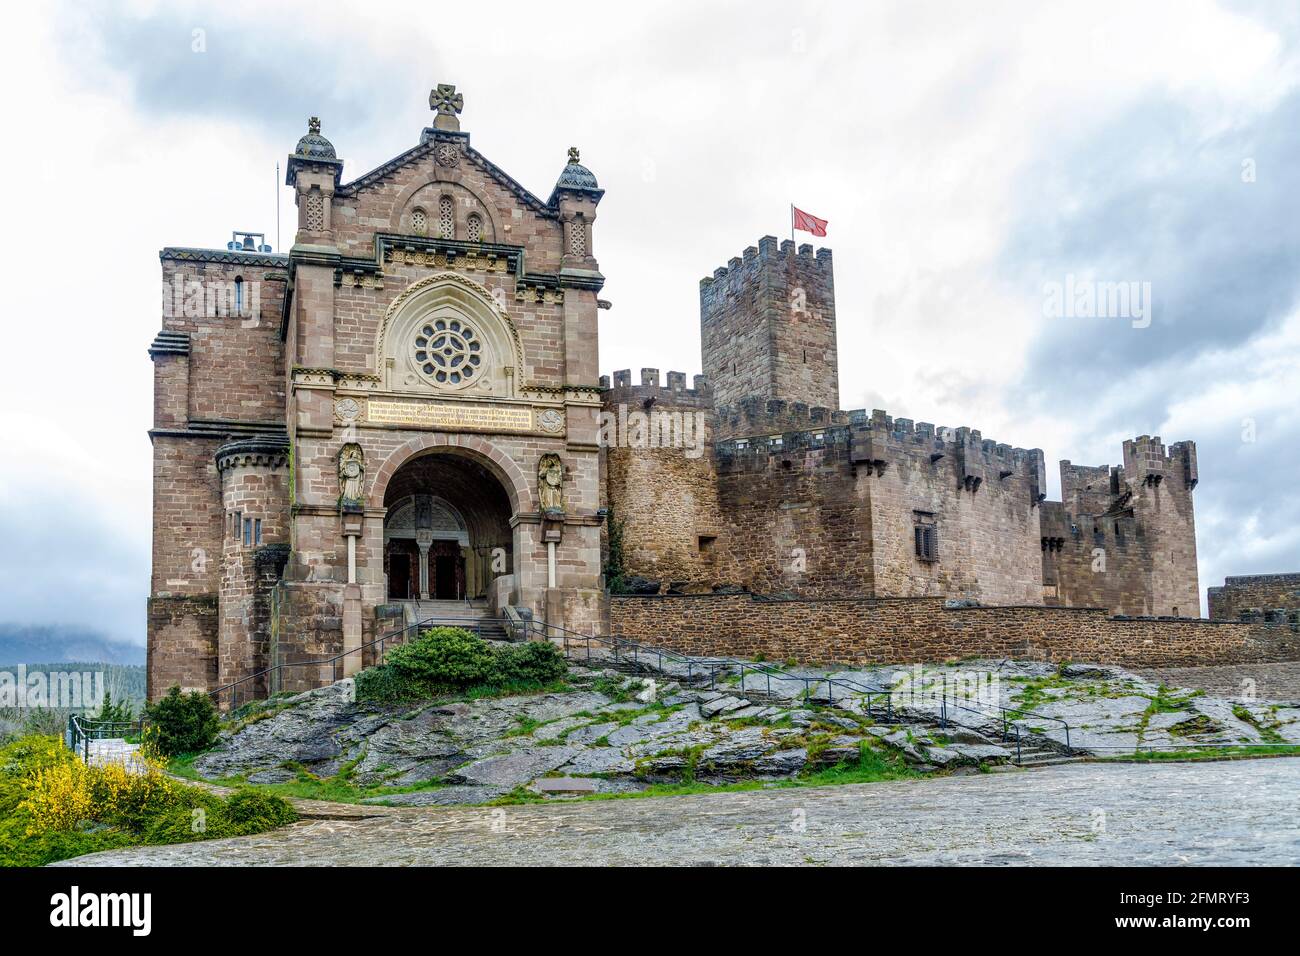 Castle of Xavier built in the 10th century is one of the main remaining icons of the Kigdom of Navarre and house former house of Saint Francis Xavier. Stock Photo